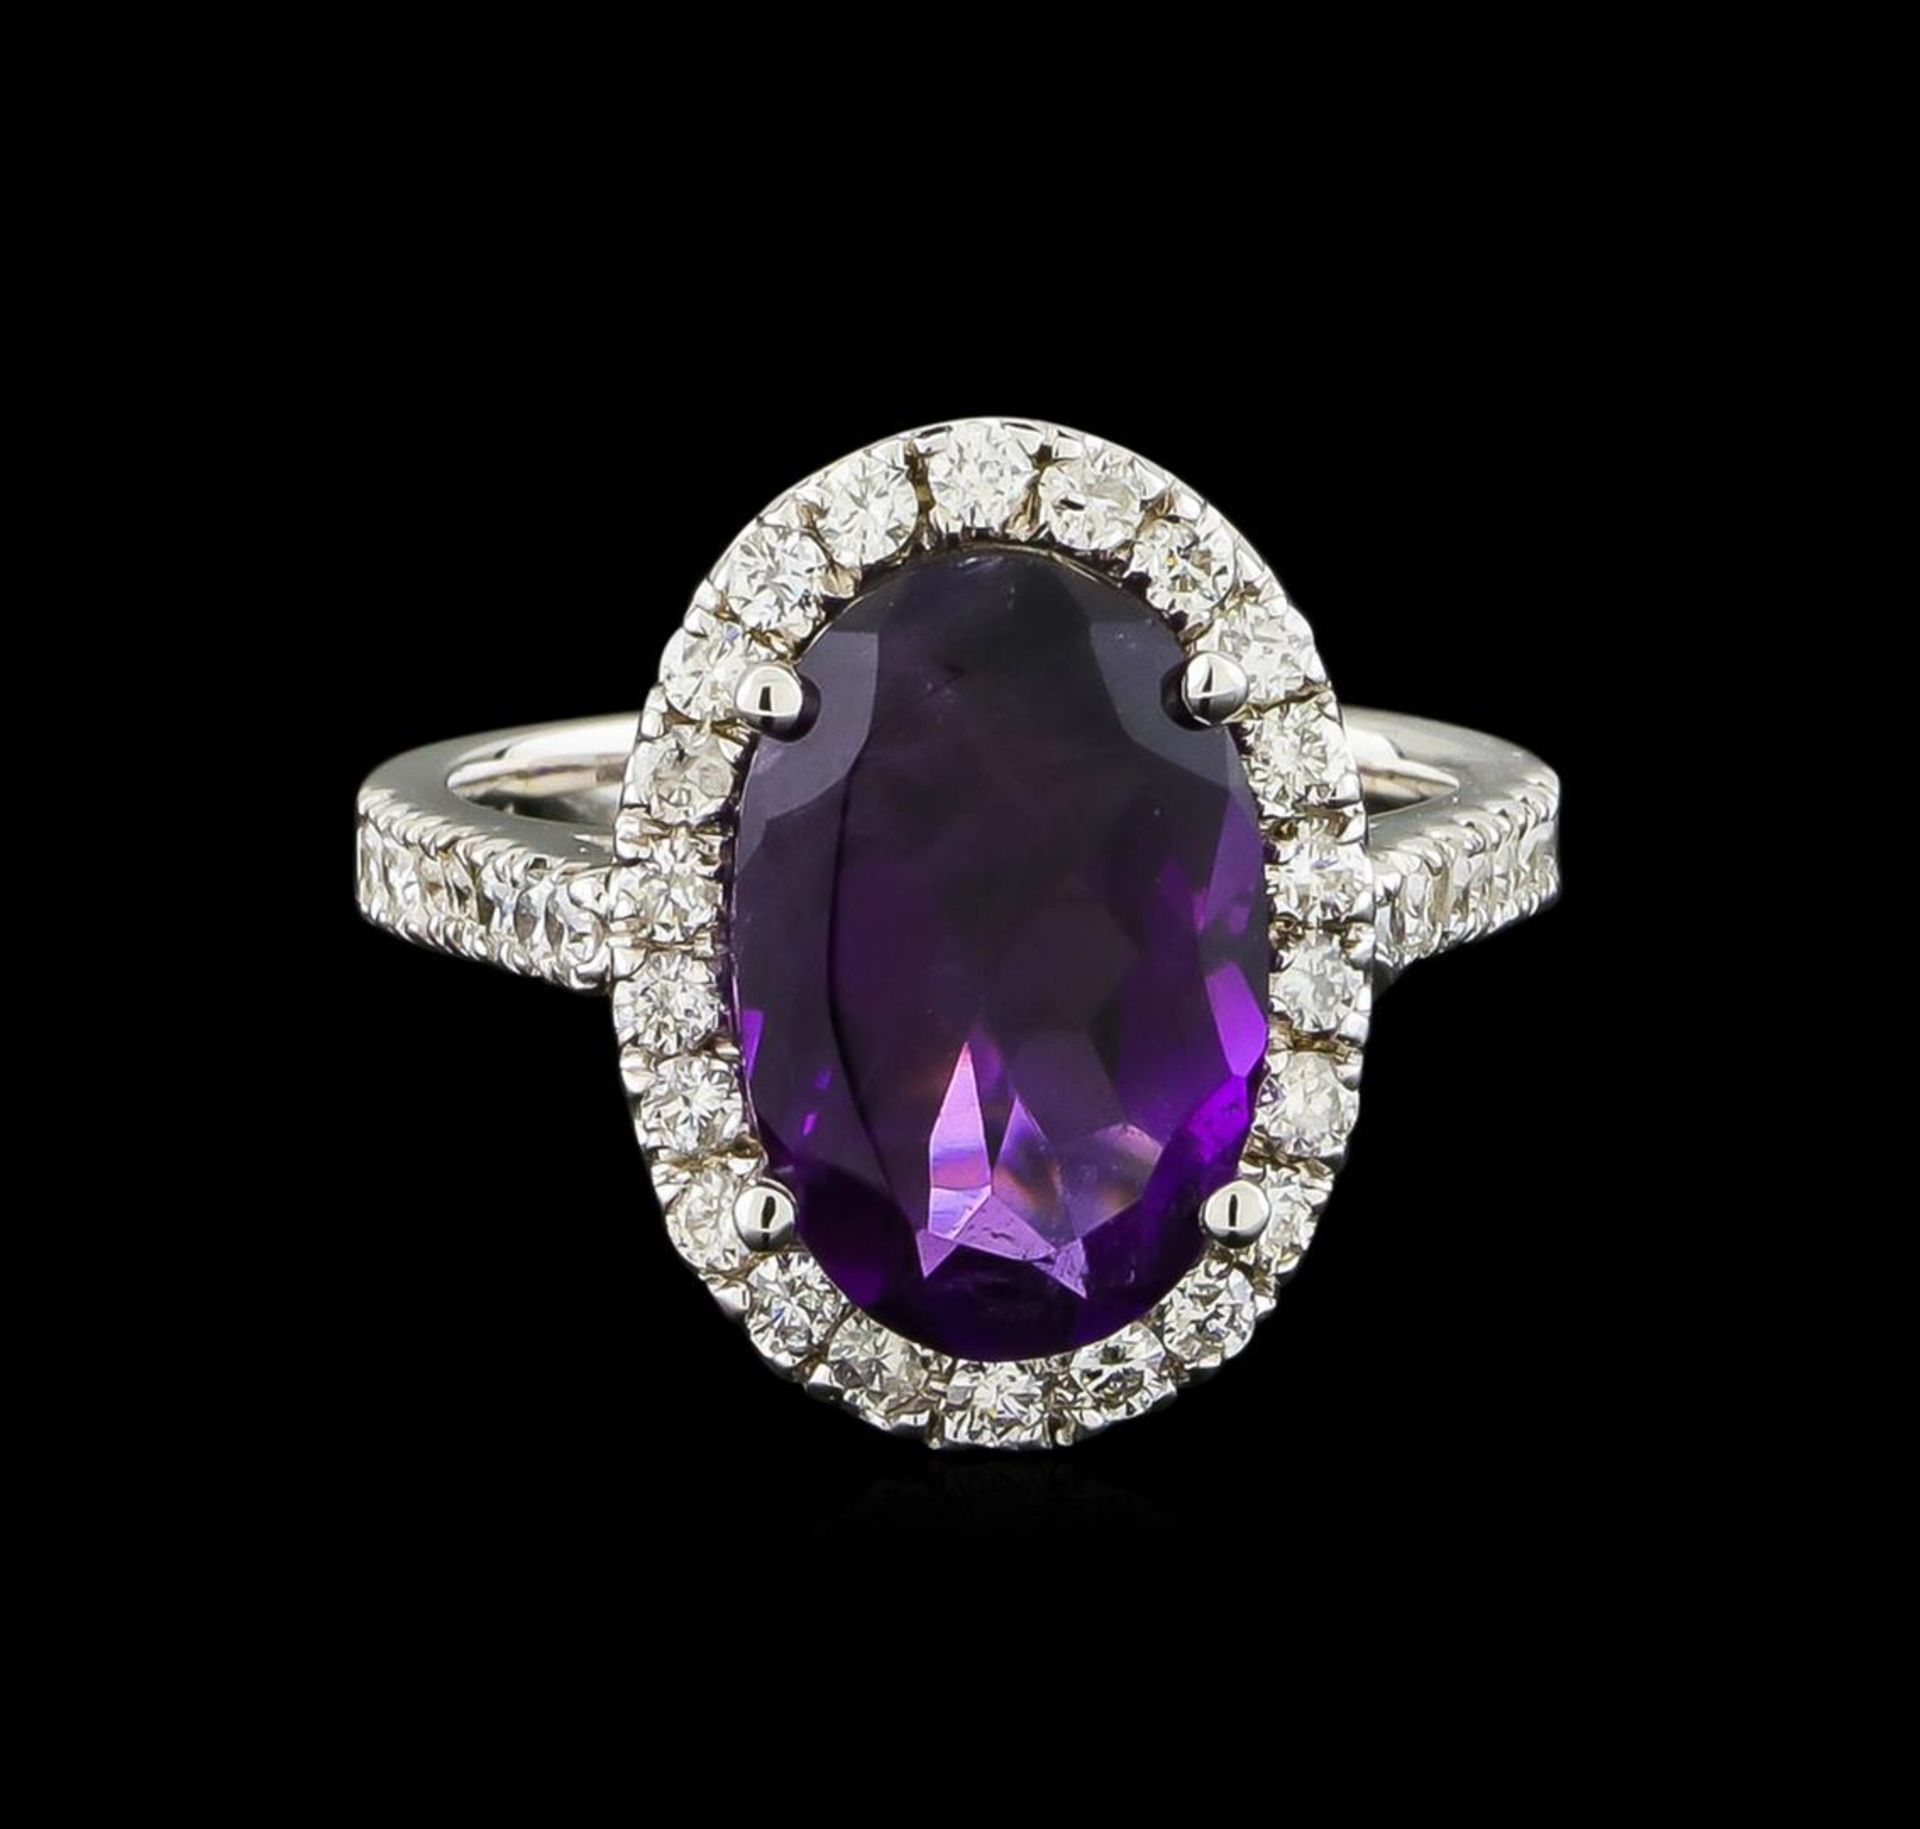 3.58ct Amethyst and Diamond Ring - 14KT White Gold - Image 2 of 4